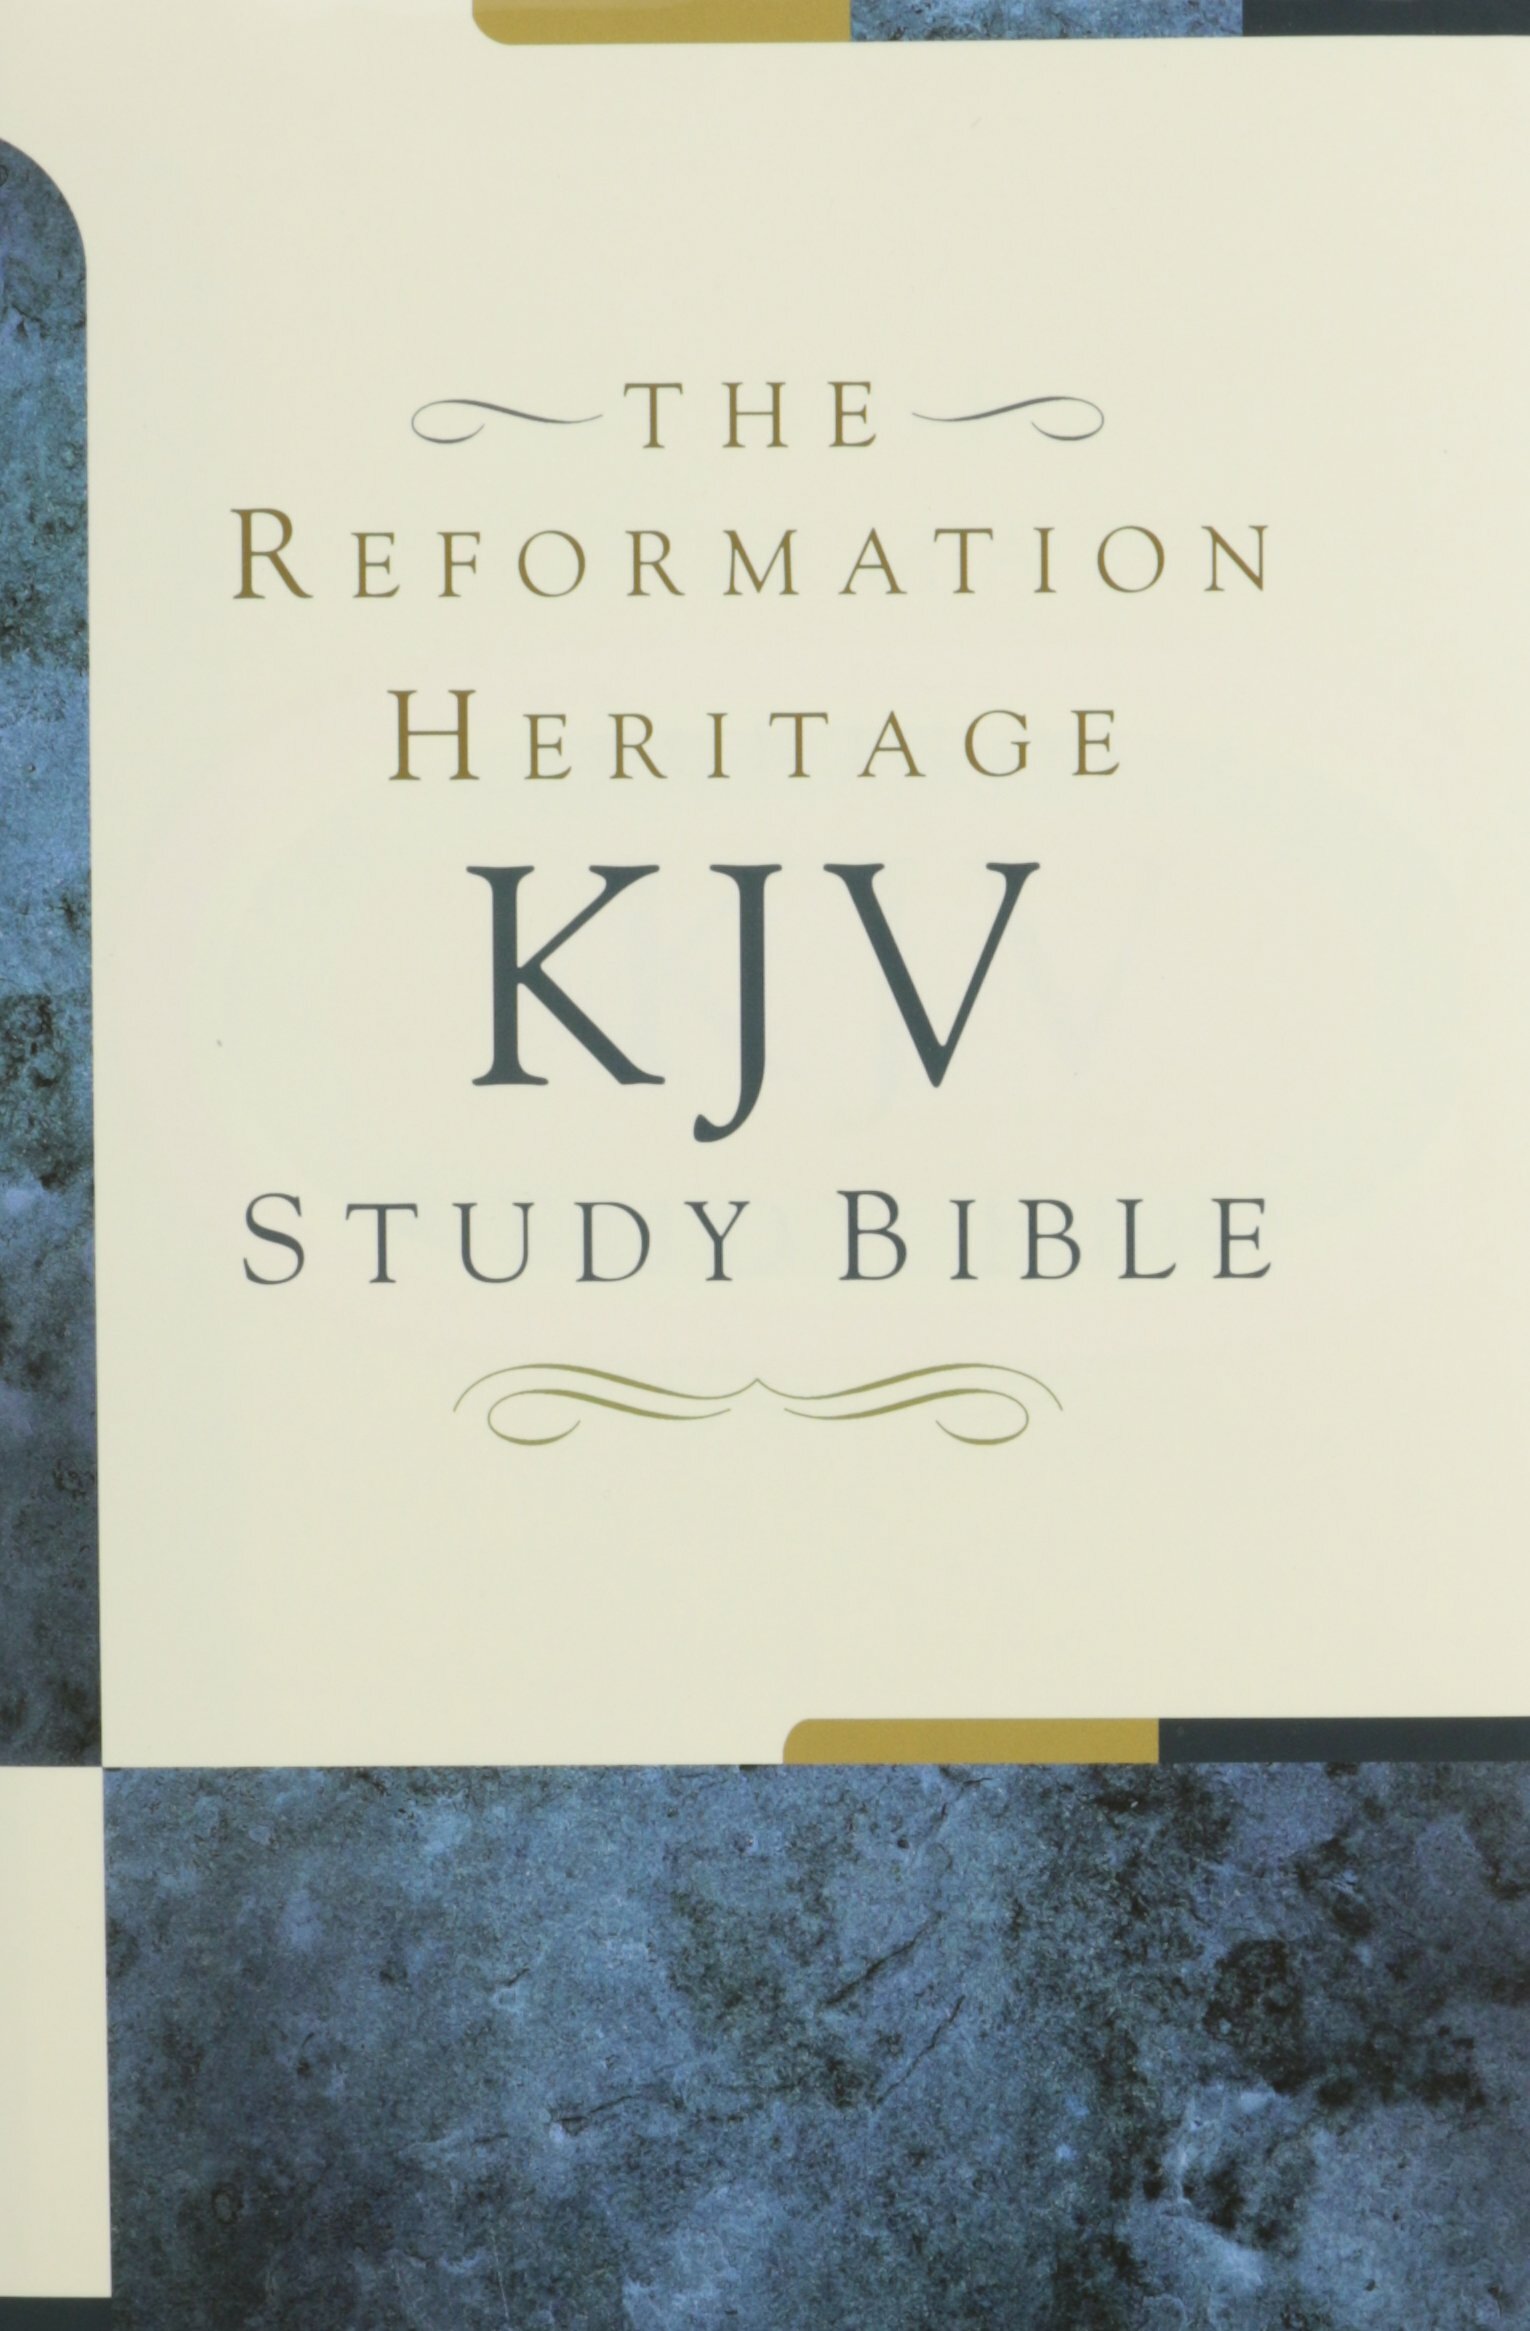 Reformation Heritage KJV Study Bible (Bible and Notes)